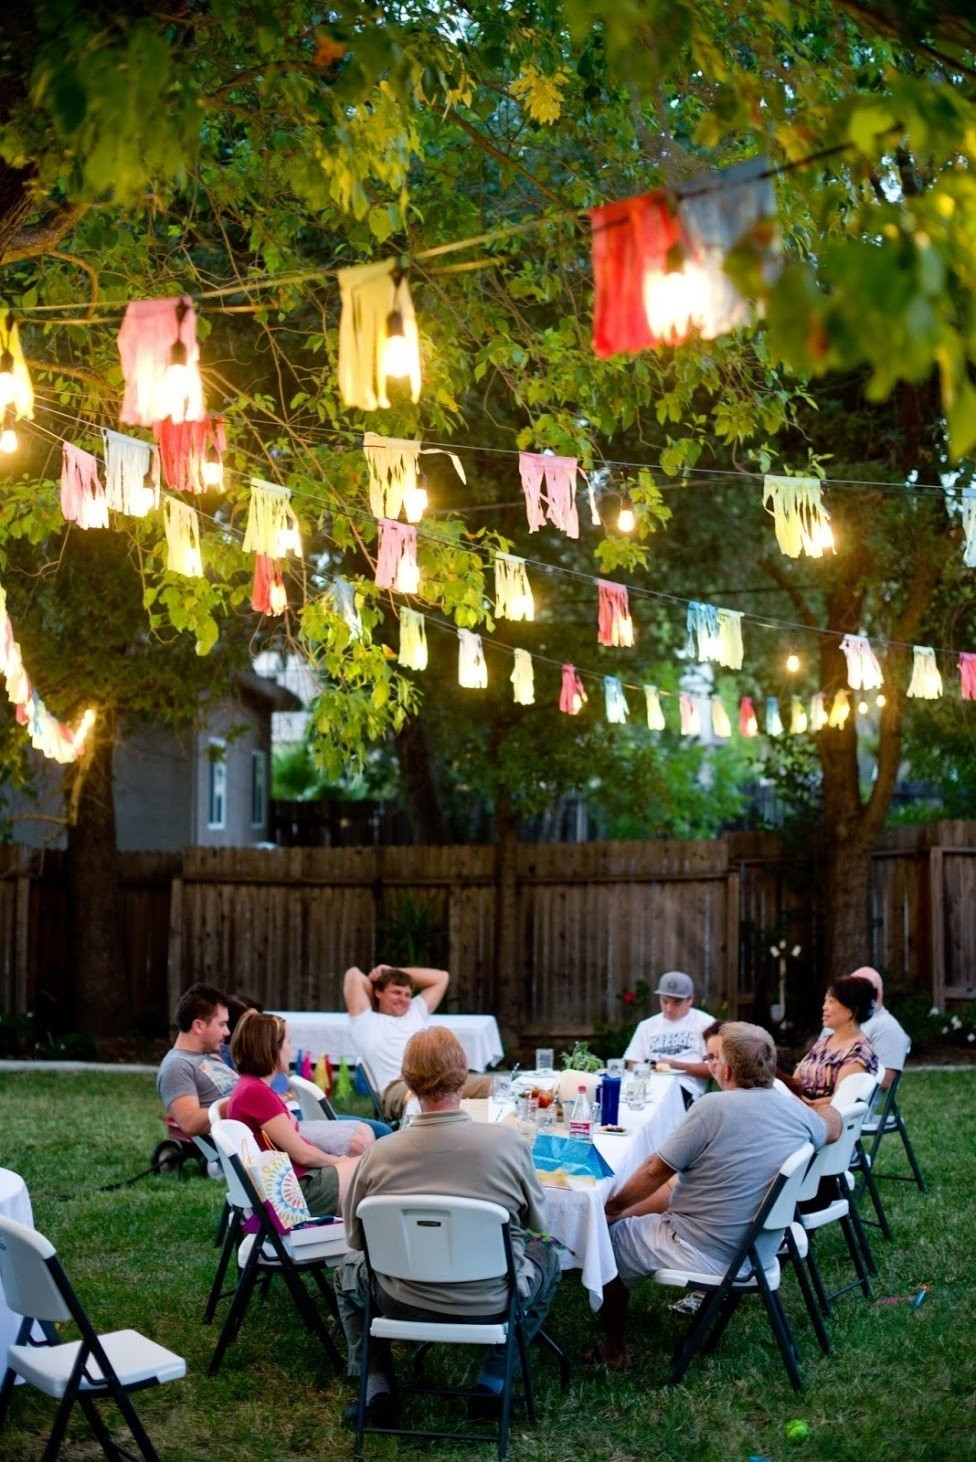 18Th Birthday Backyard Party Ideas
 10 Famous Outdoor Birthday Party Ideas For Adults 2019